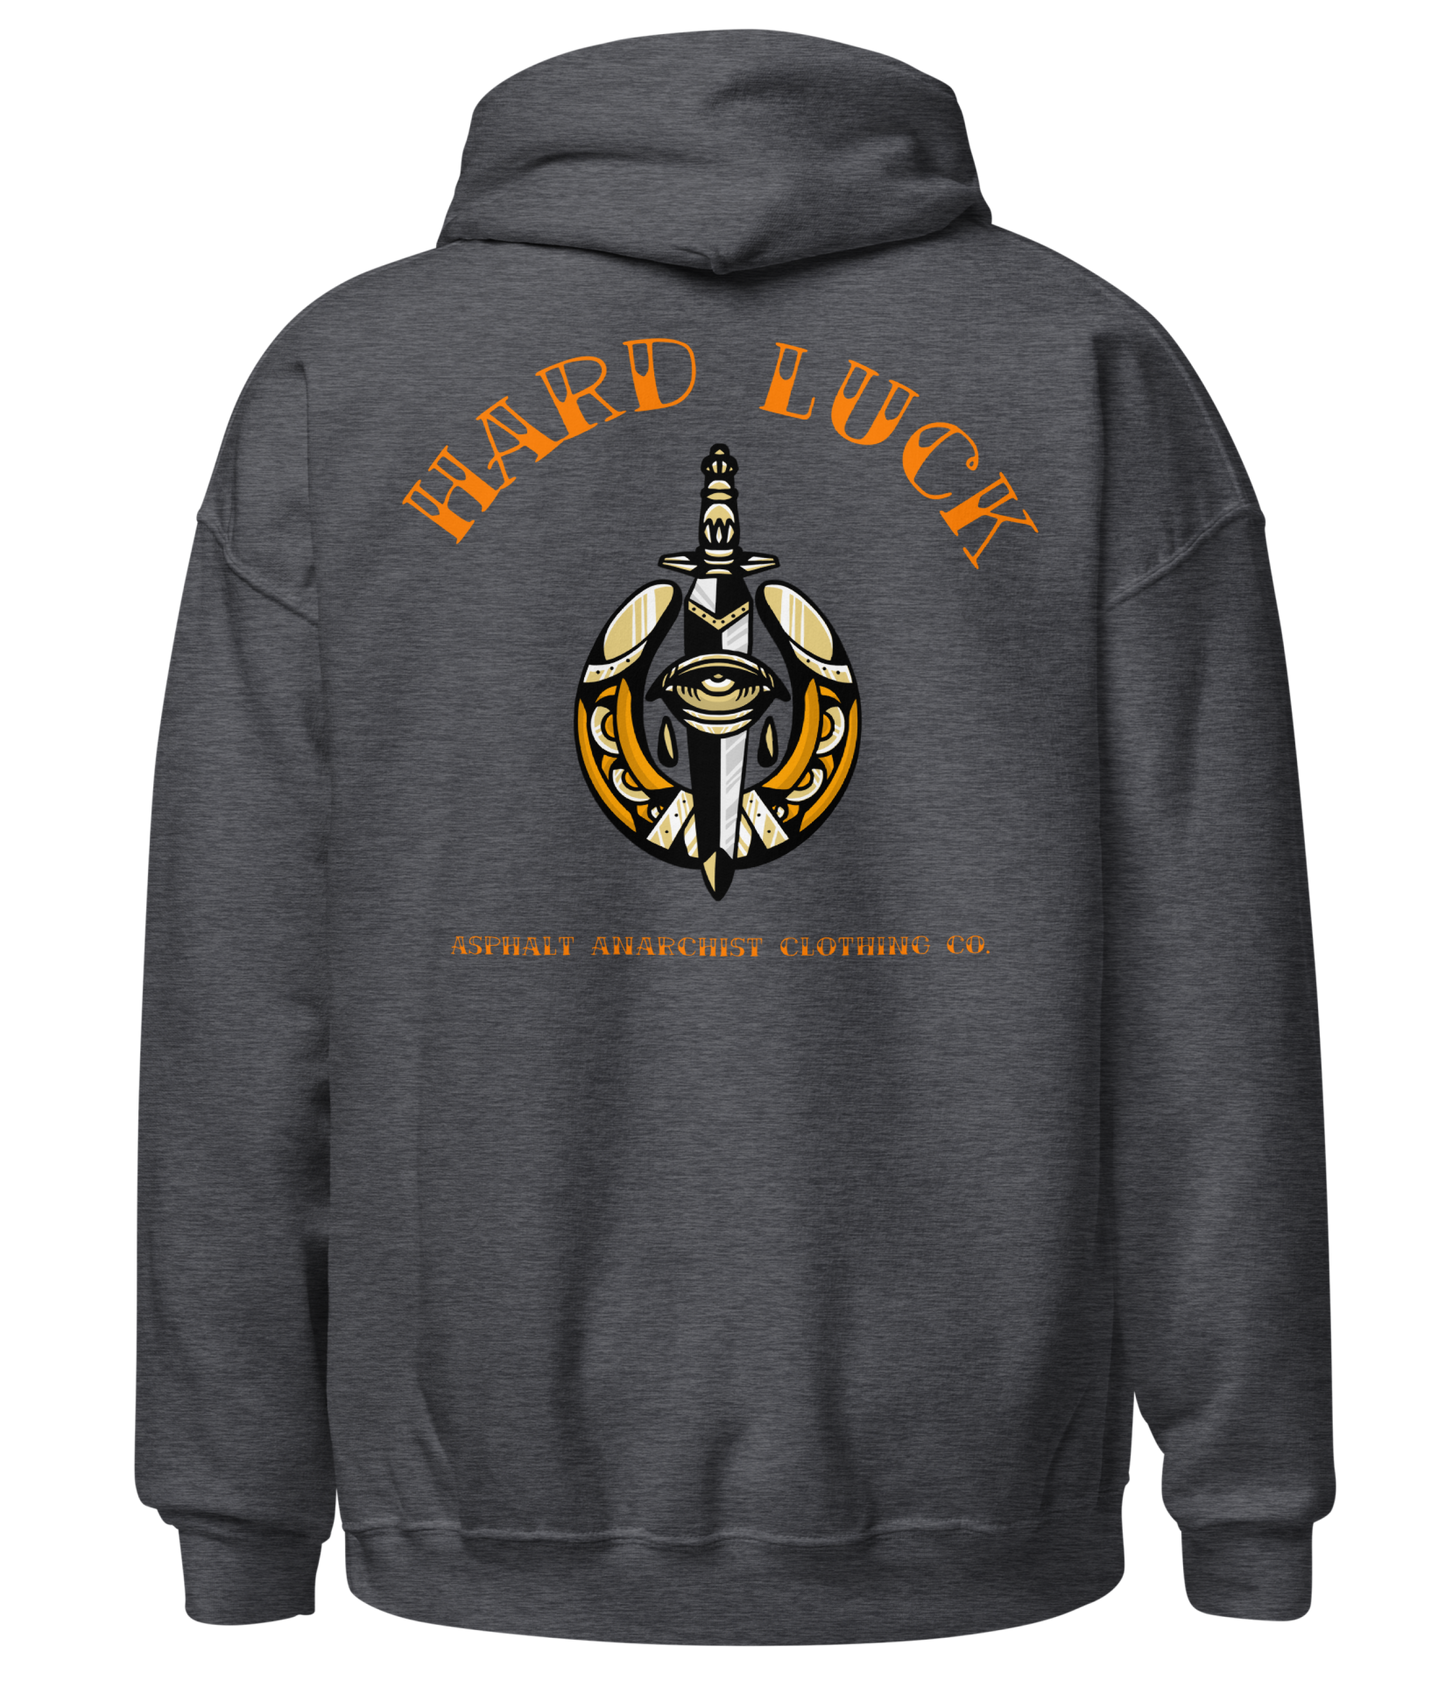 Hard Luck Hoodie From Asphalt Anarchist Clothing Co. HOT ROD KUSTOM KULTURE APPAREL & PRODUCTS